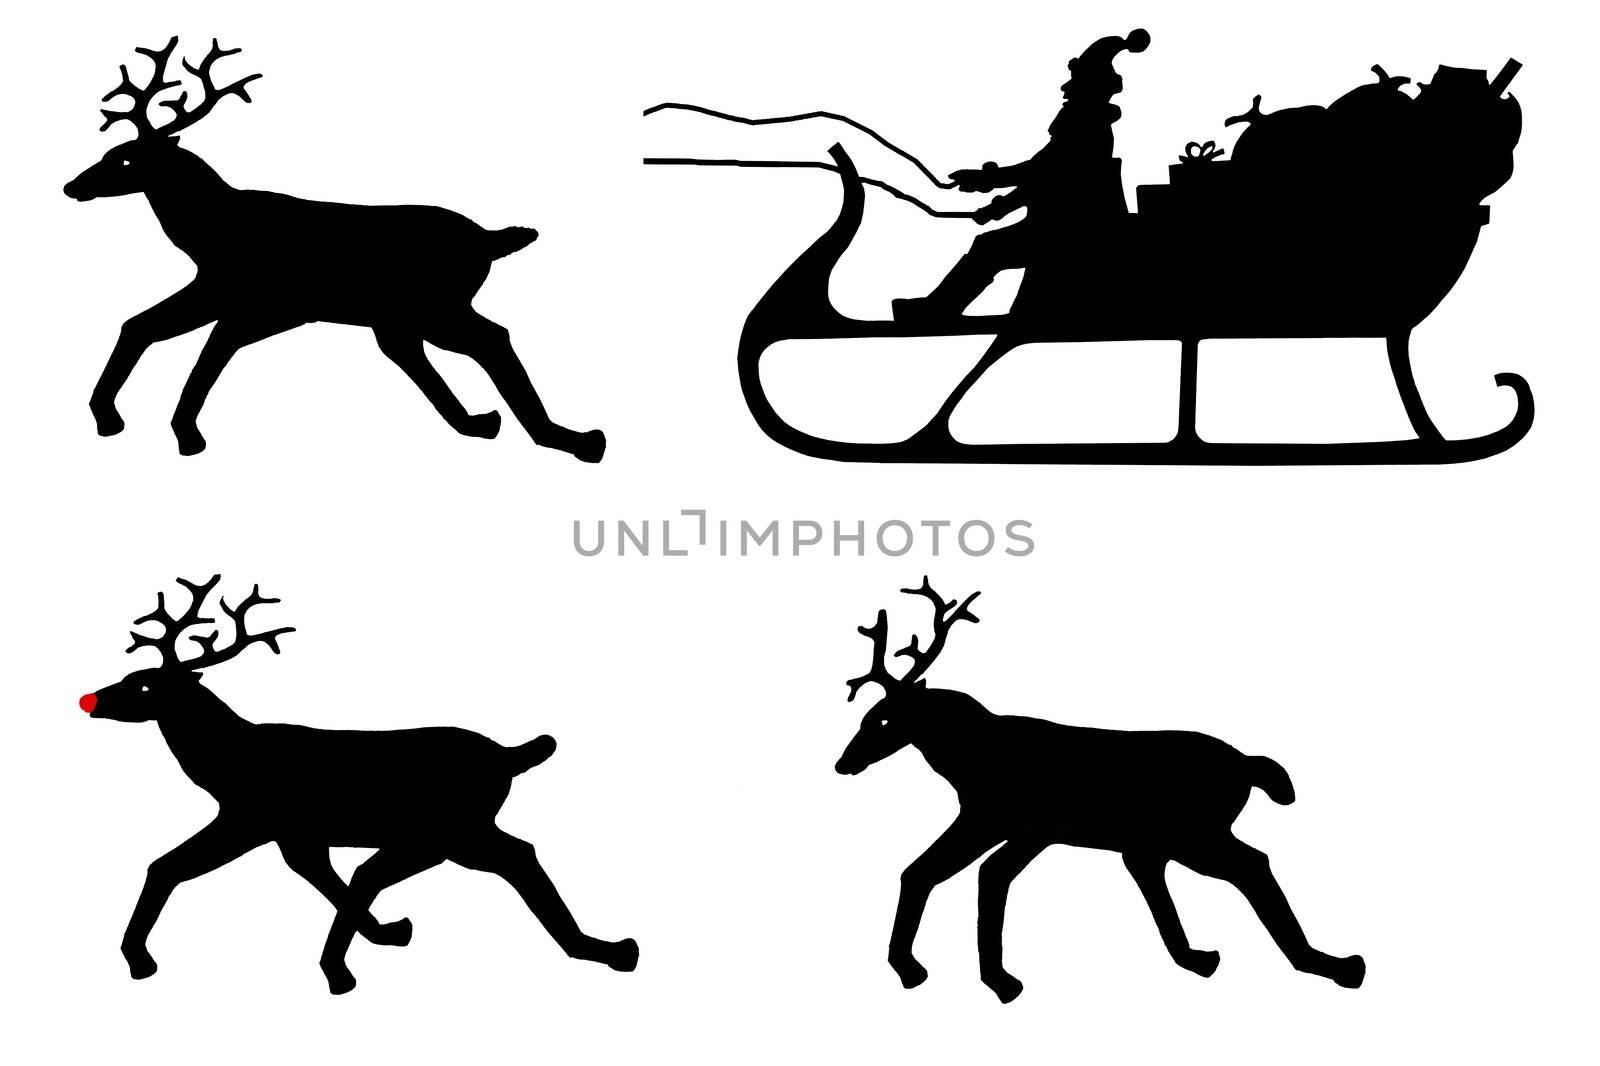 Illustration of Santa's sleigh with reindeer by acremead